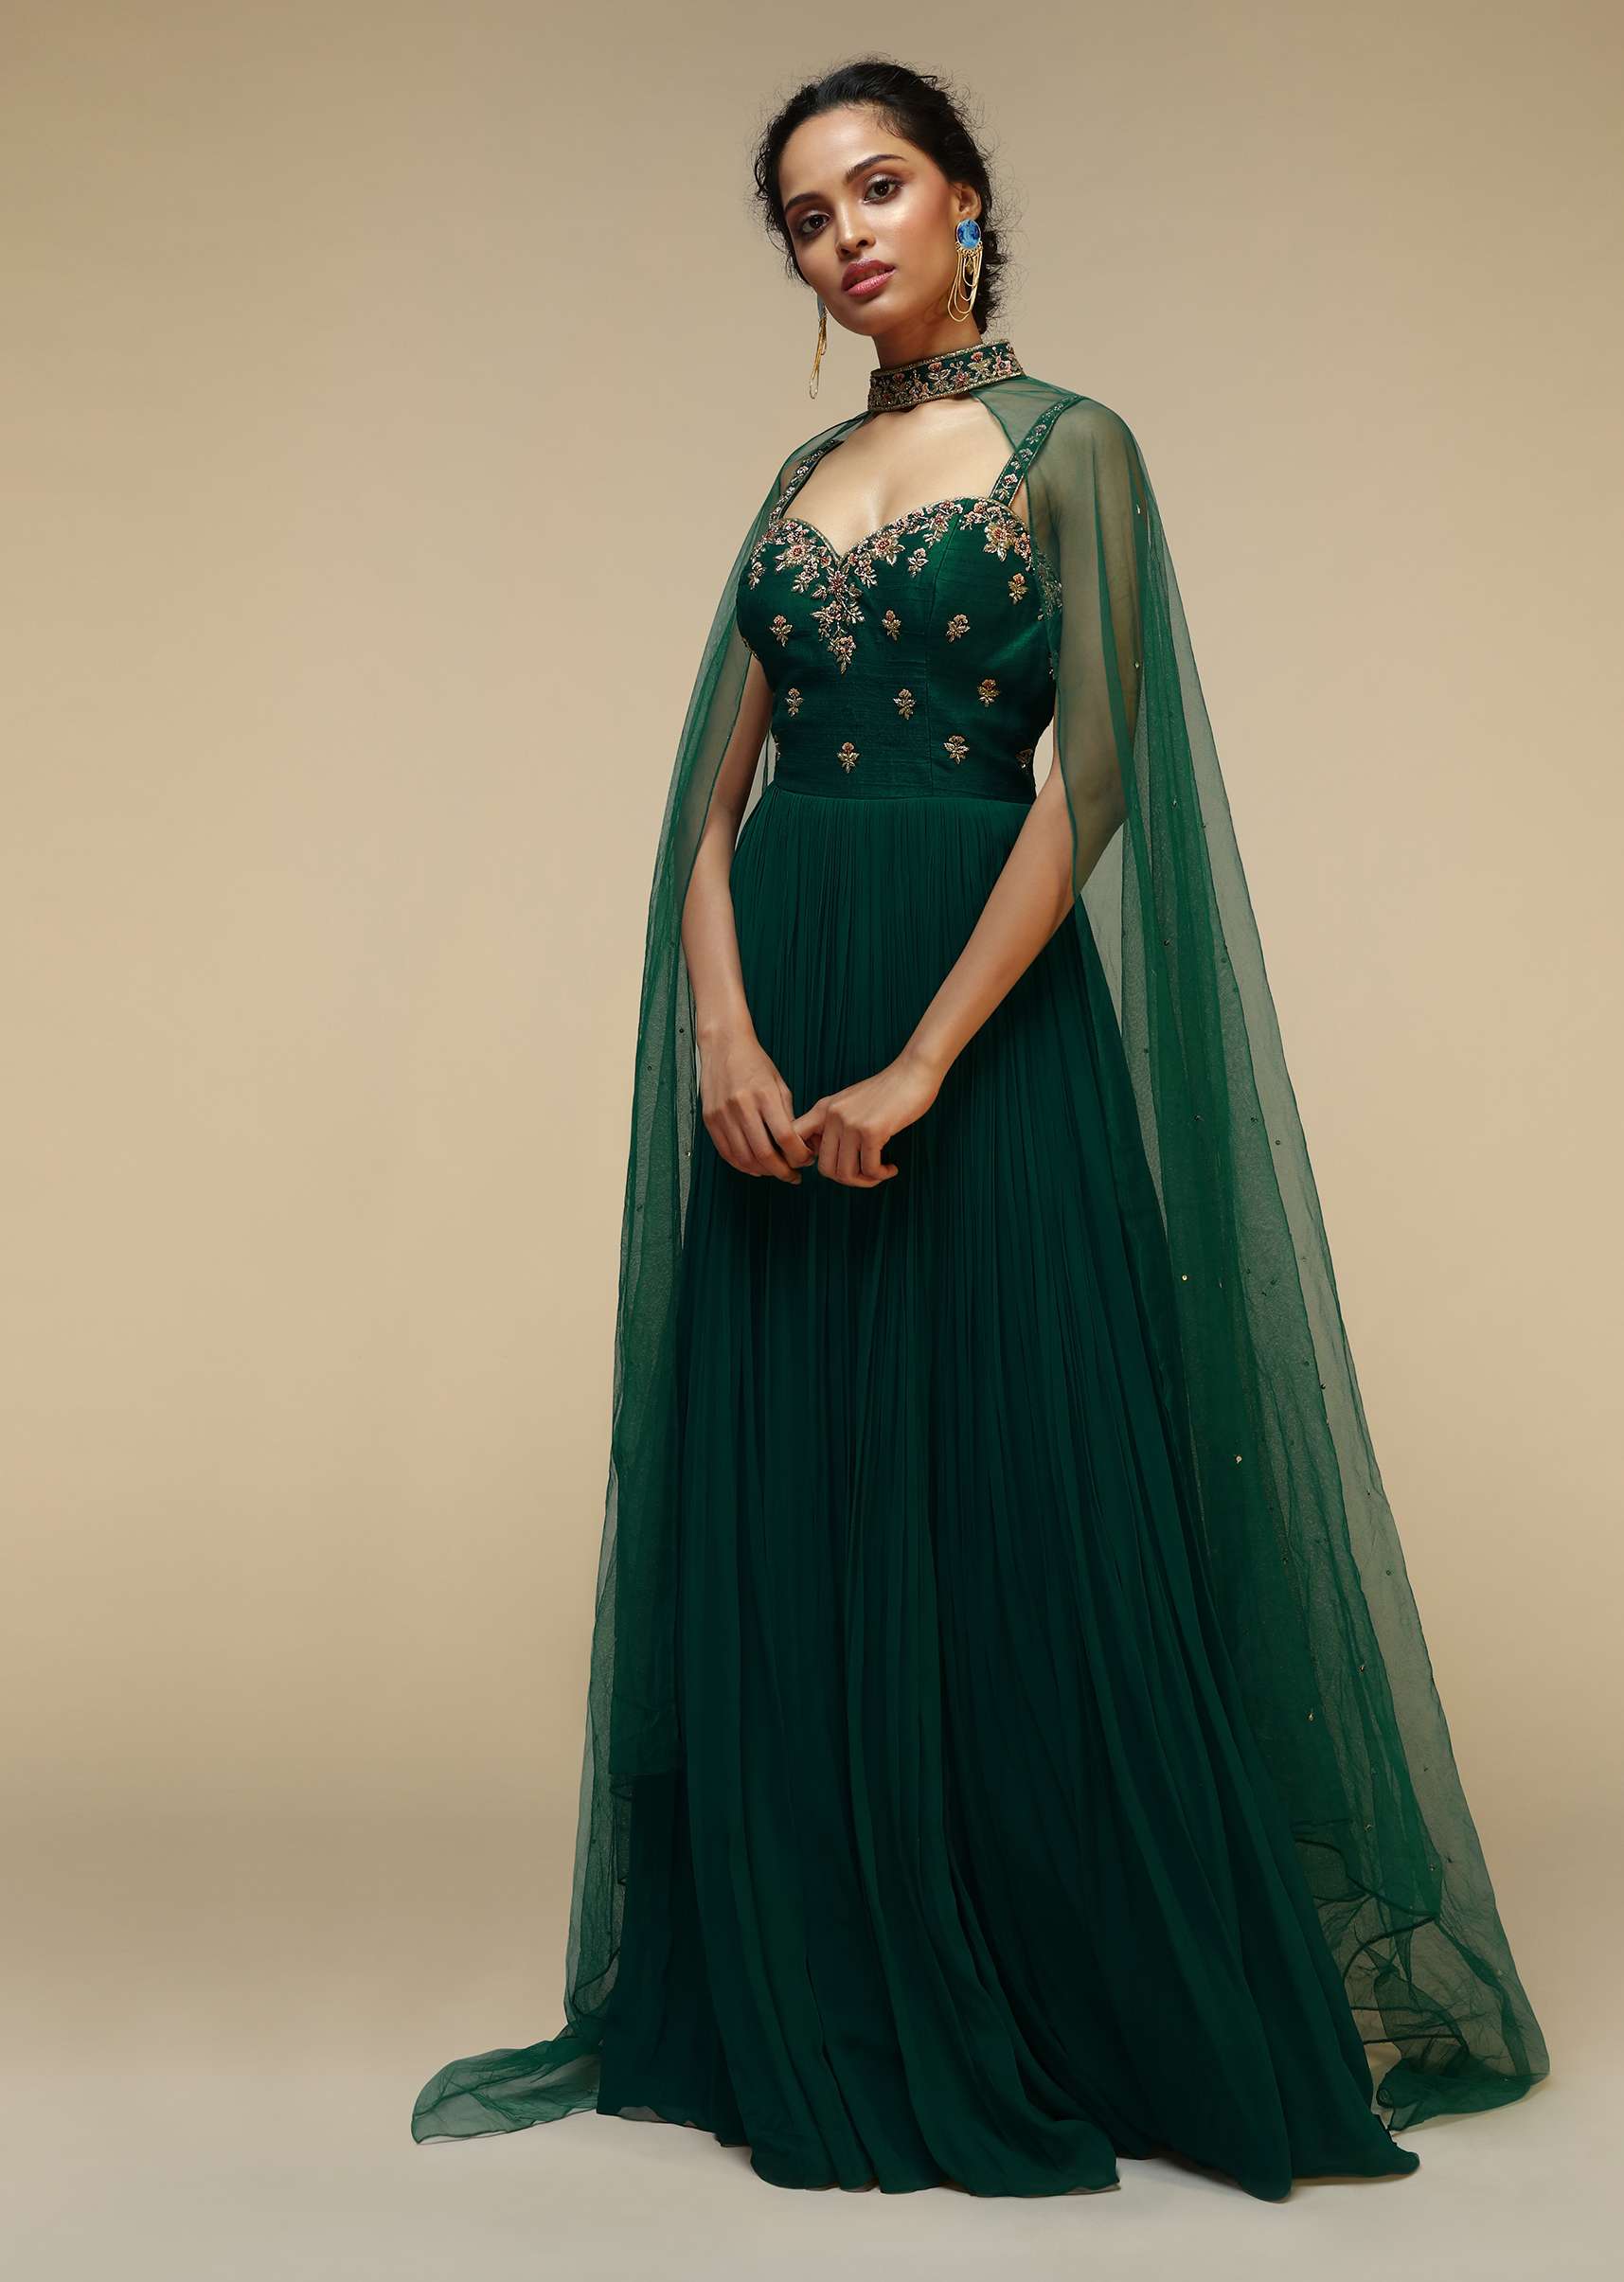 Bottle Green Anarkali Gown With Hand Embroidered Floral Design Using Multi Colored Sequins And Cut Dana Work